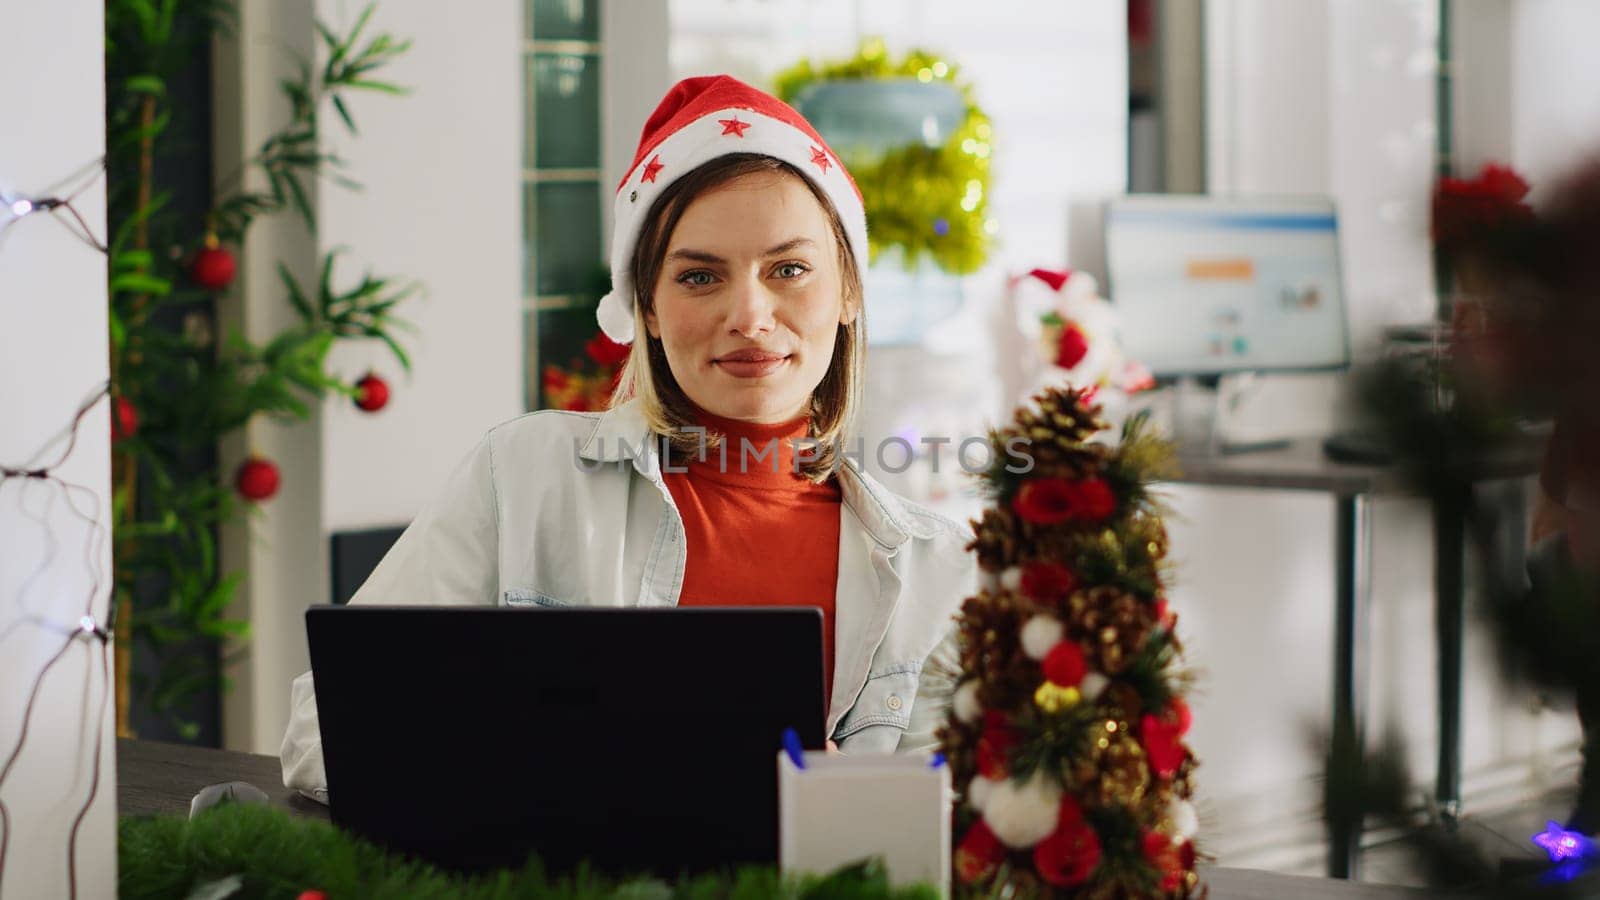 Close up portrait of bookkeeper in Christmas decorated office checking documents for accuracy. Employee solving tasks at computer desk in xmas ornate workspace during winter holiday season